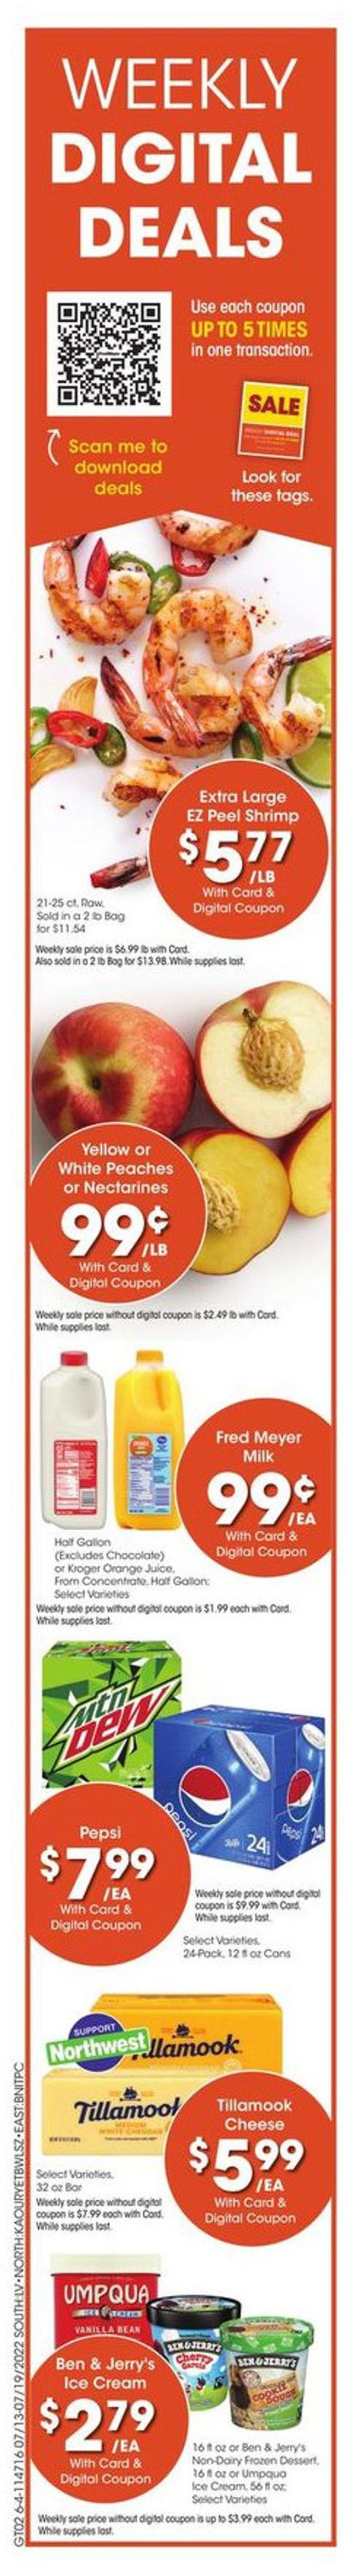 Fred Meyer Ad from 07/13/2022